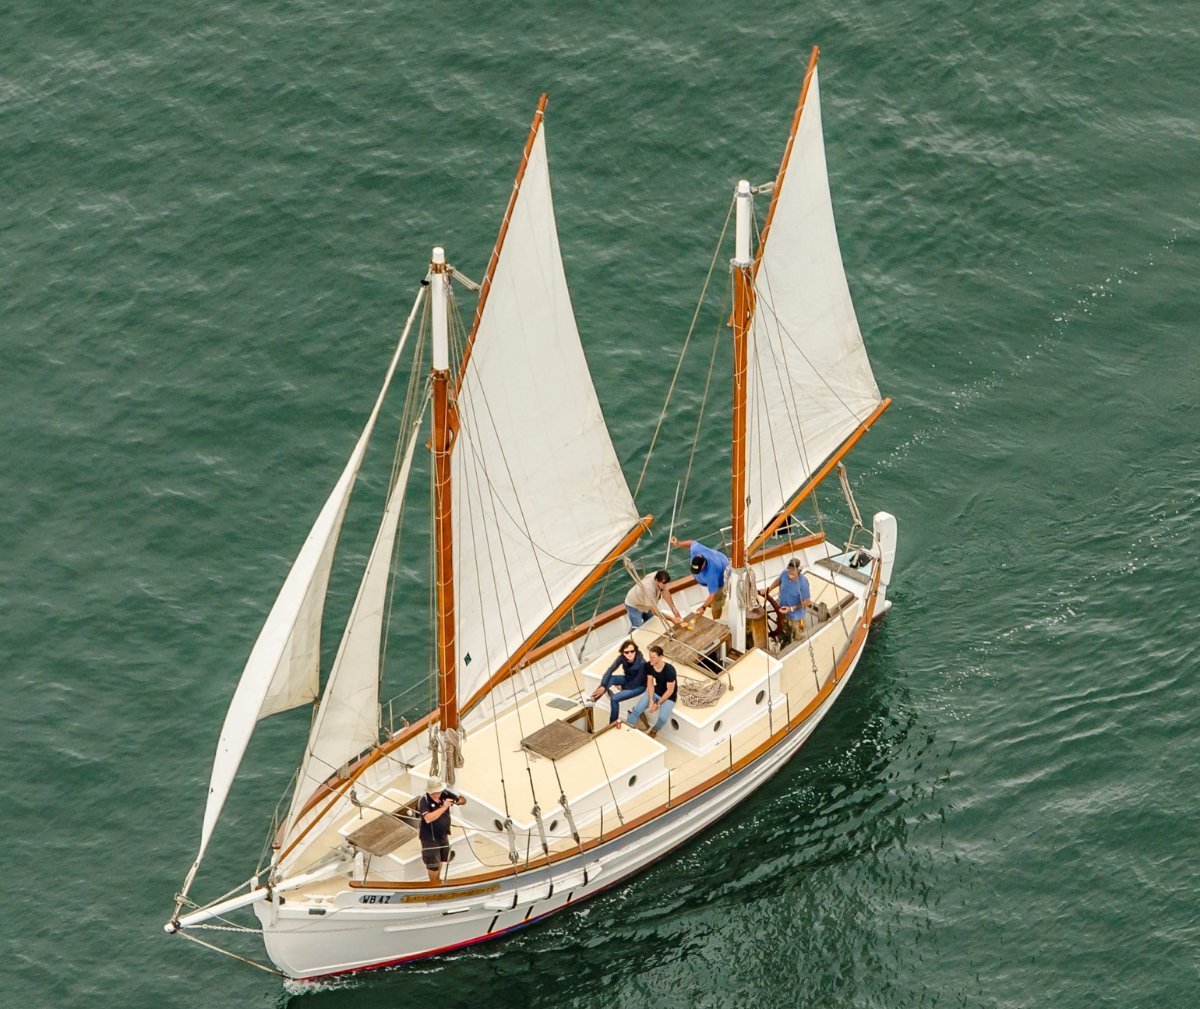 gaff rigged yachts for sale australia